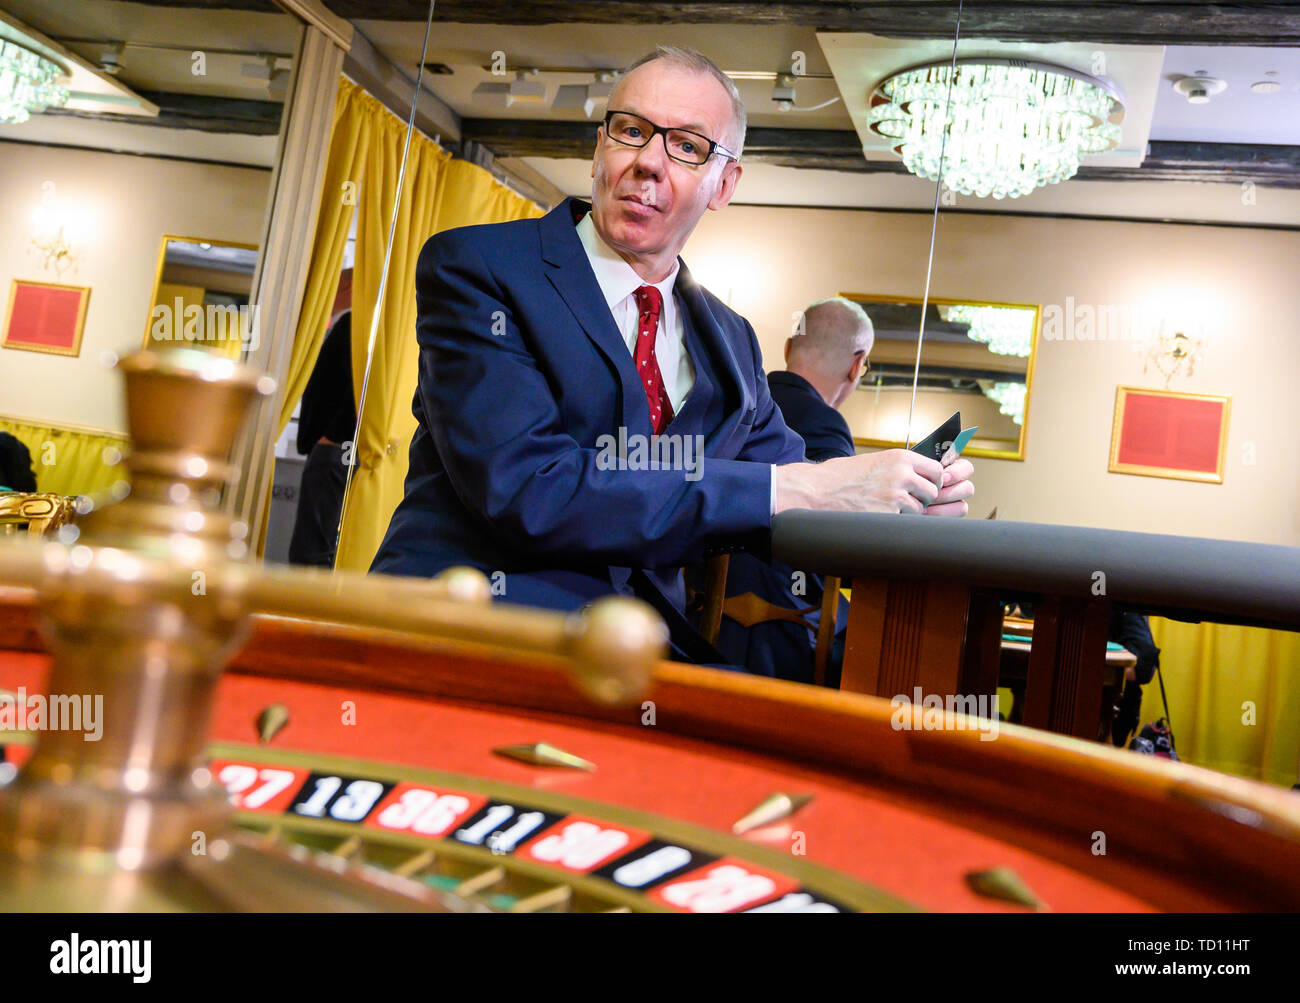 Hameln, Germany. 11th June, 2019. Ludger Pistor, actor in the James Bond film 'Casino Royale' (2006) as Swiss private banker 'Herr Mendel', sits in the exhibition 'James Bond. The power of seduction' in the Museum Hameln at a casino table. The exhibition will run from 12 June 2019 to 10 May 2020. Credit: Christophe Gateau/dpa/Alamy Live News Stock Photo